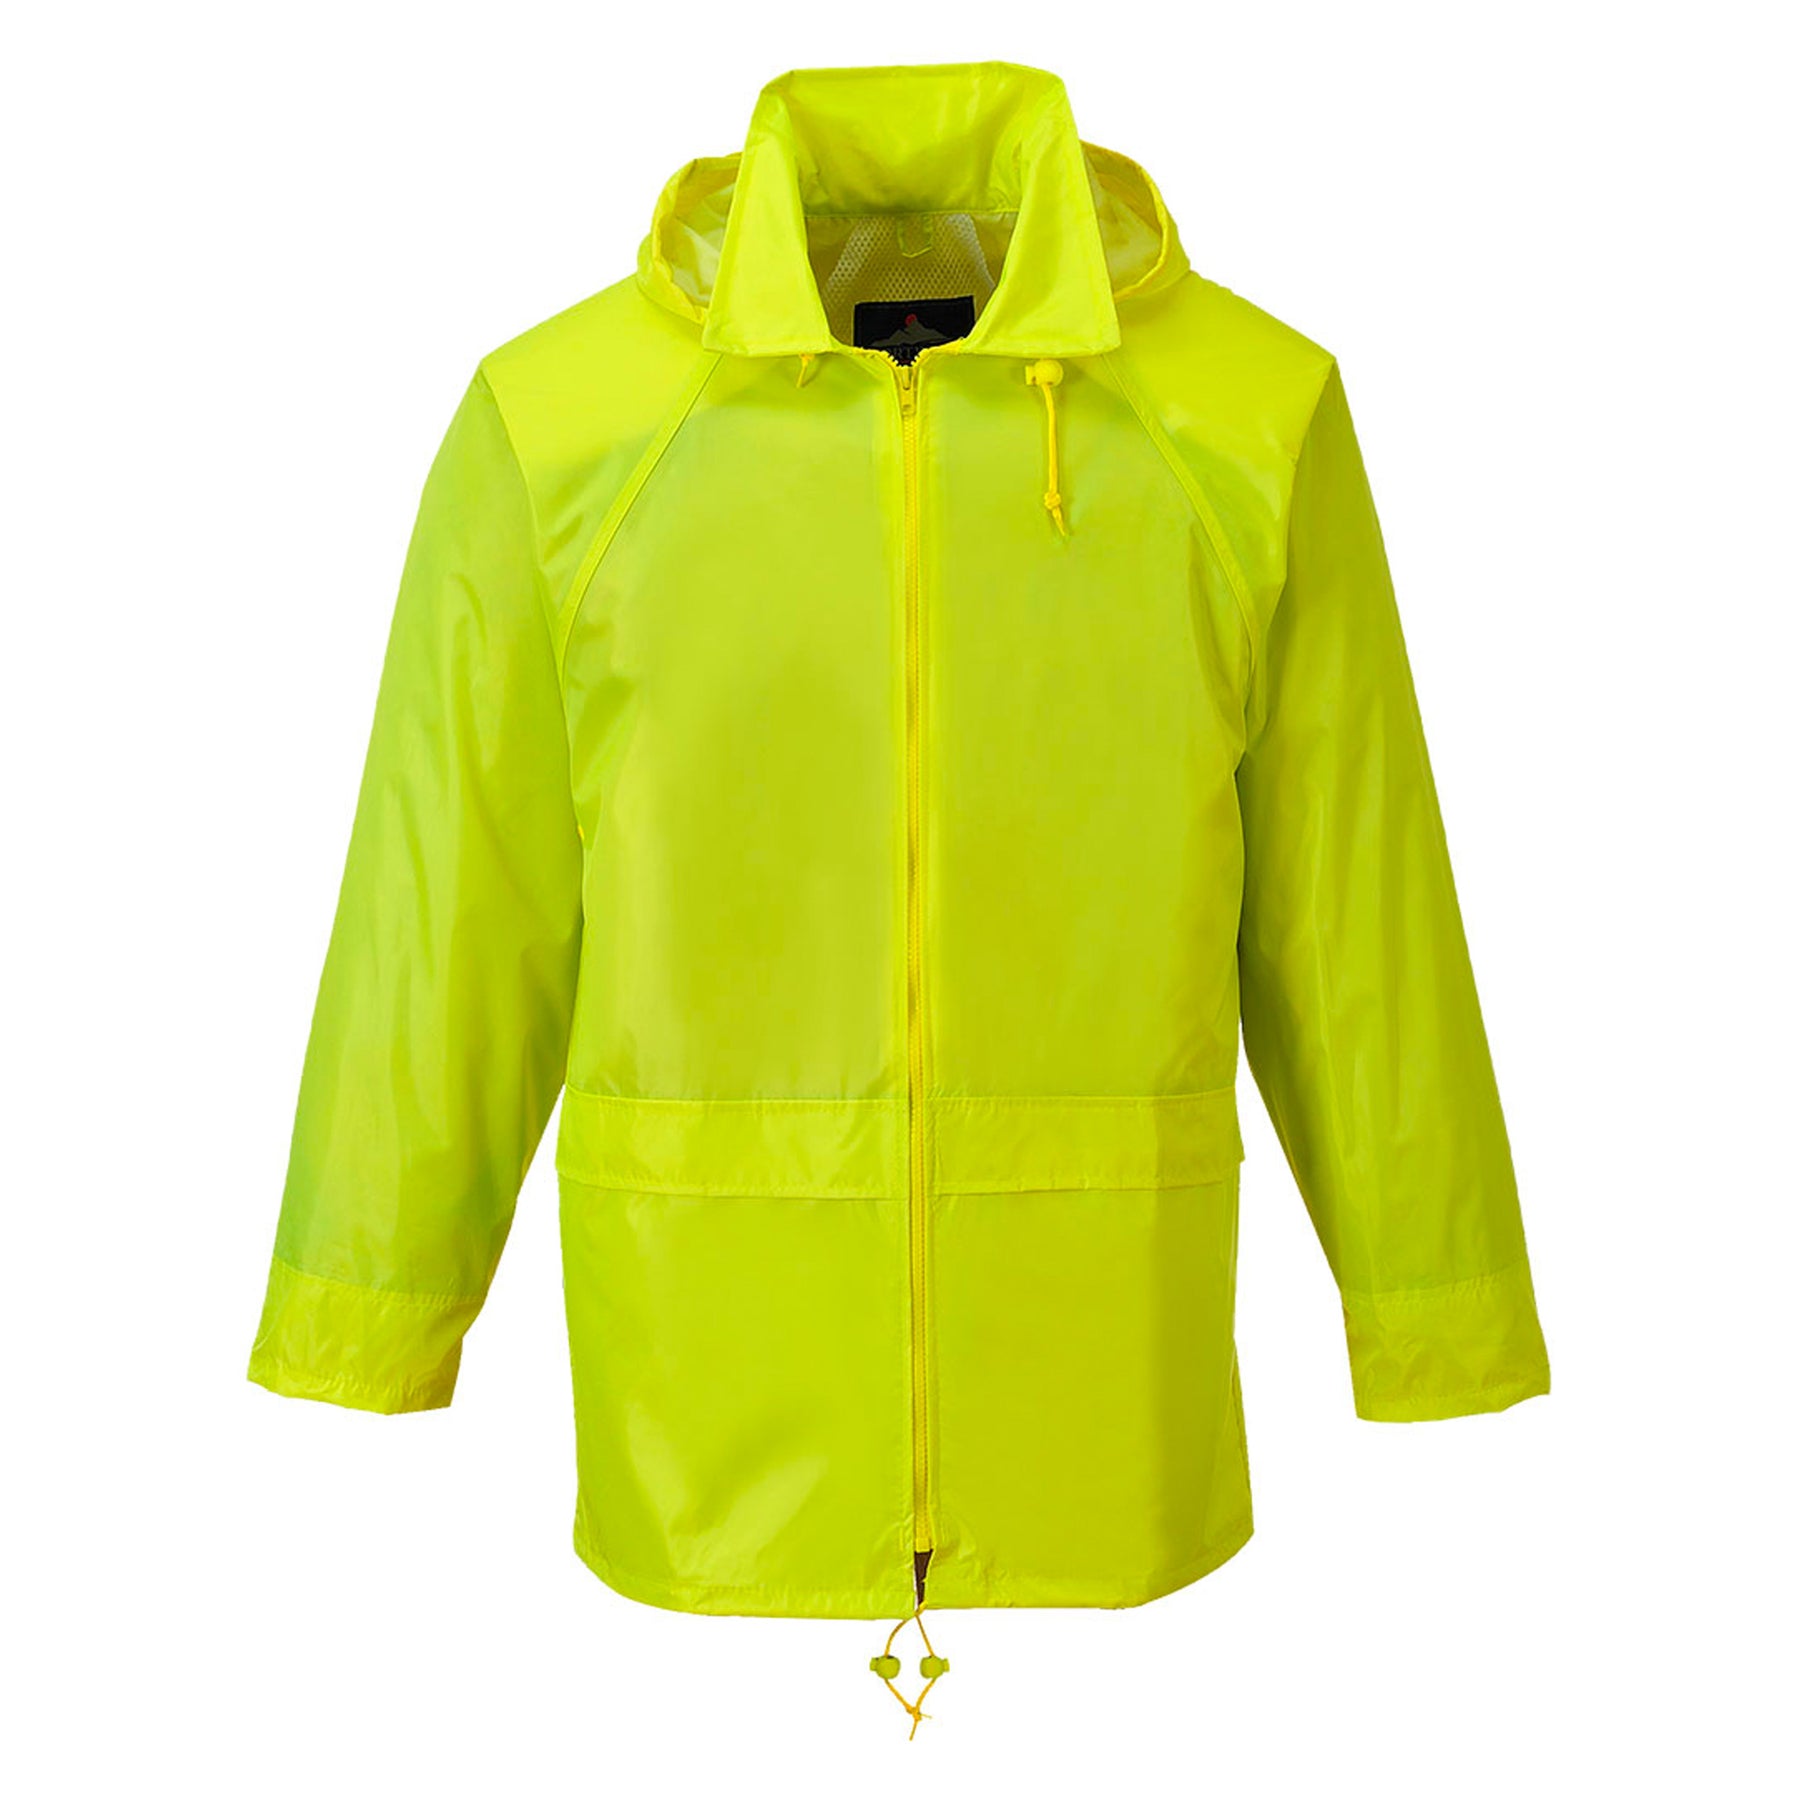 prime mover classic rain jacket in yellow